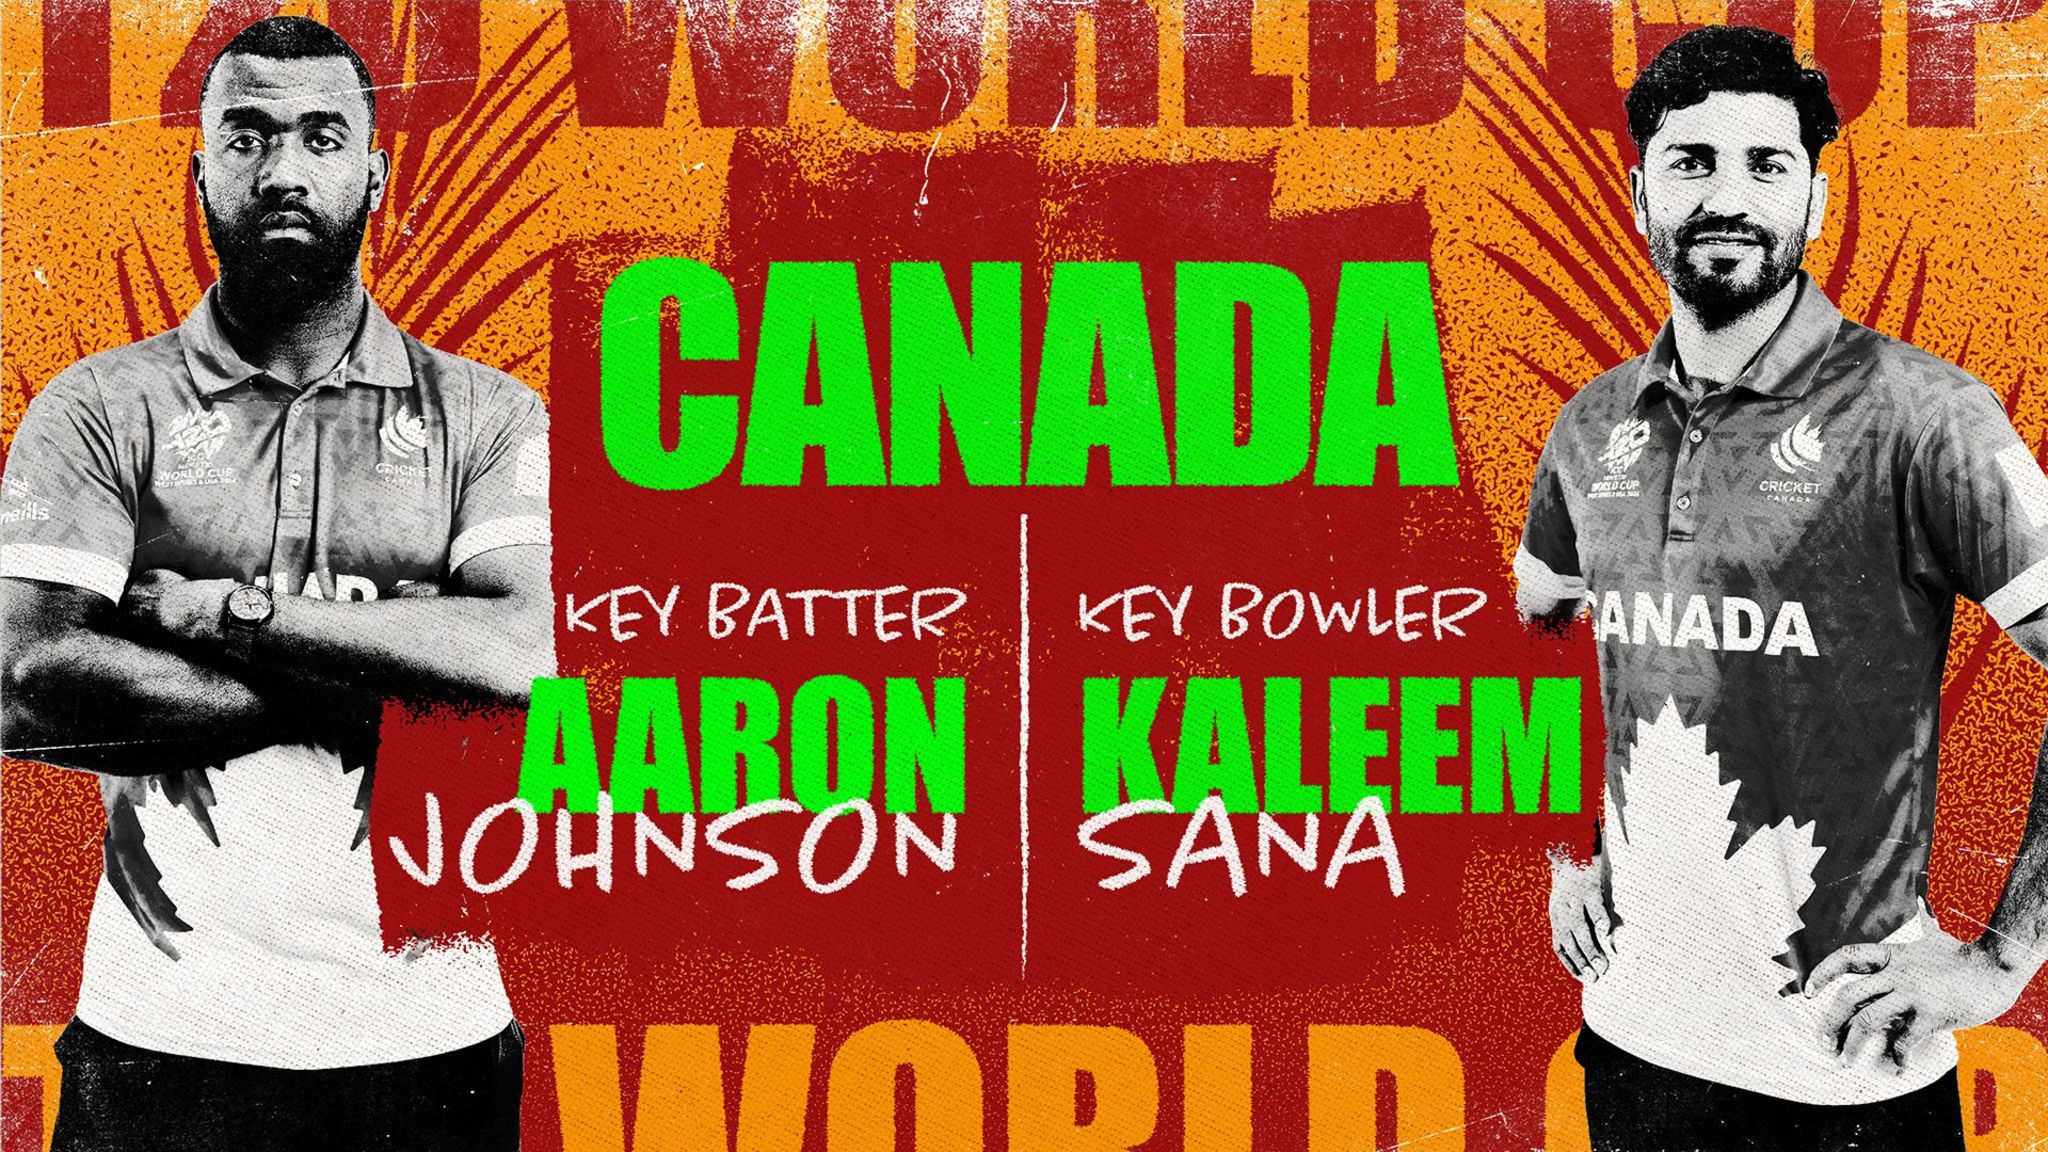 A graphic showing Aaron Johnson and Kaleem Sana as Canada's key batter and bowler at the Men's T20 World Cup